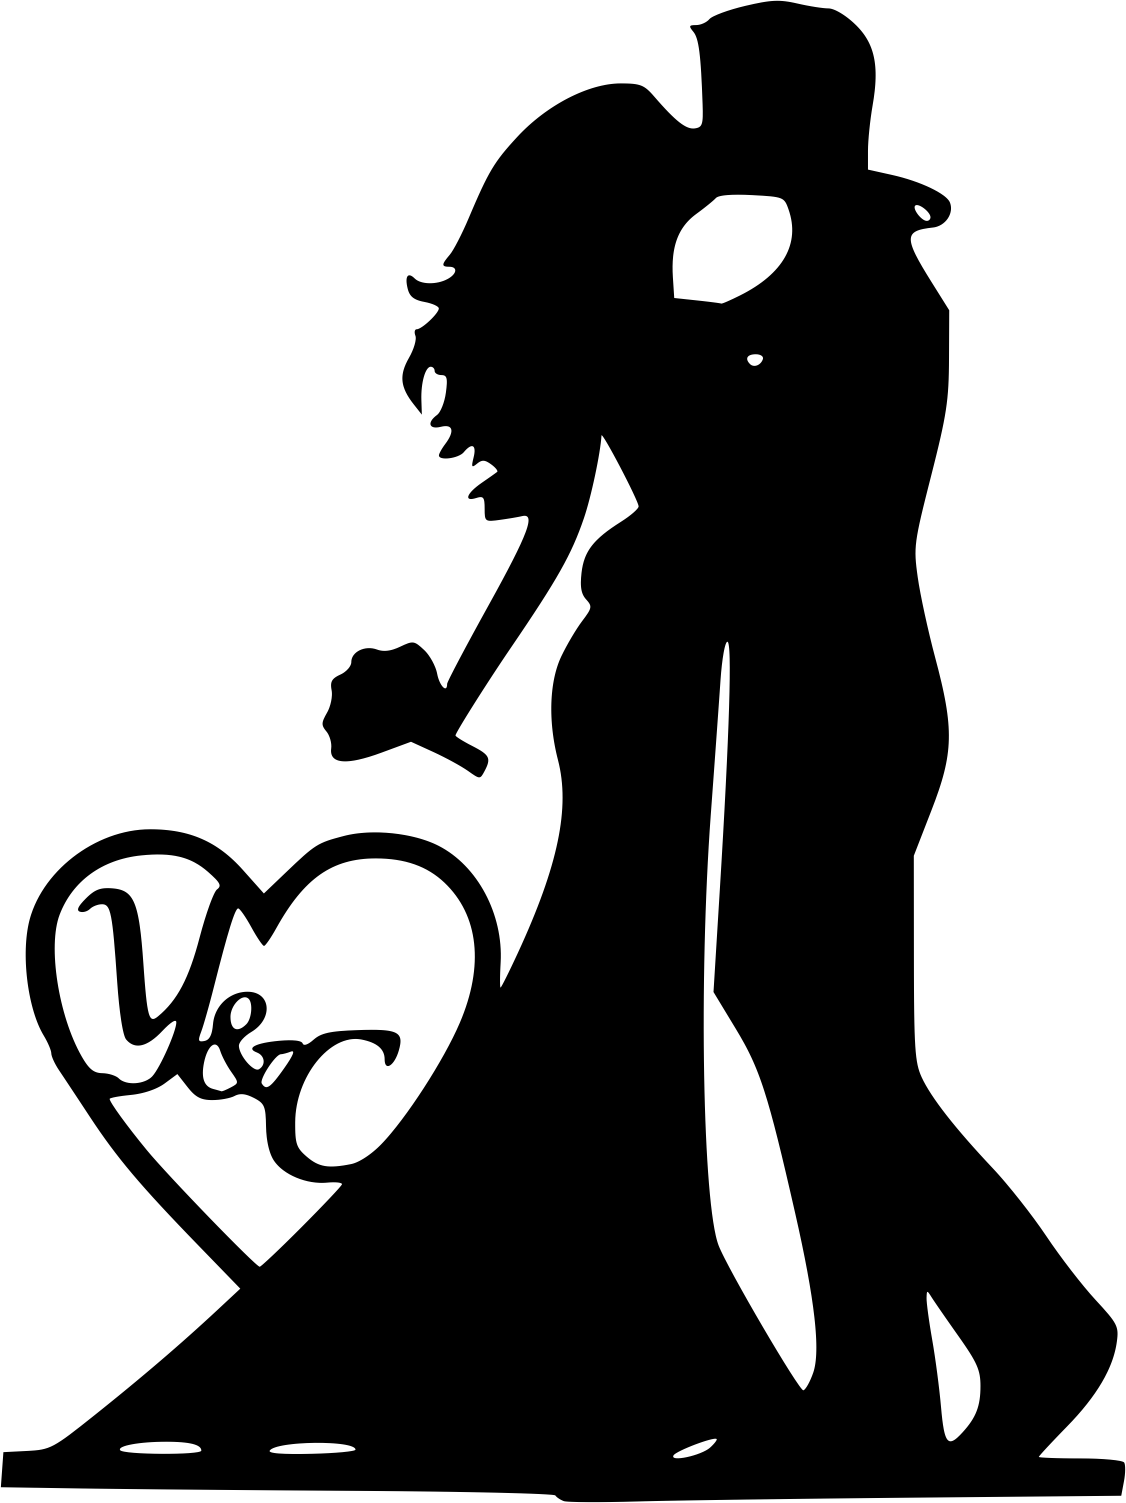 Download Mr and Mrs Silhouette Black Bride and Groom Vector Free ...